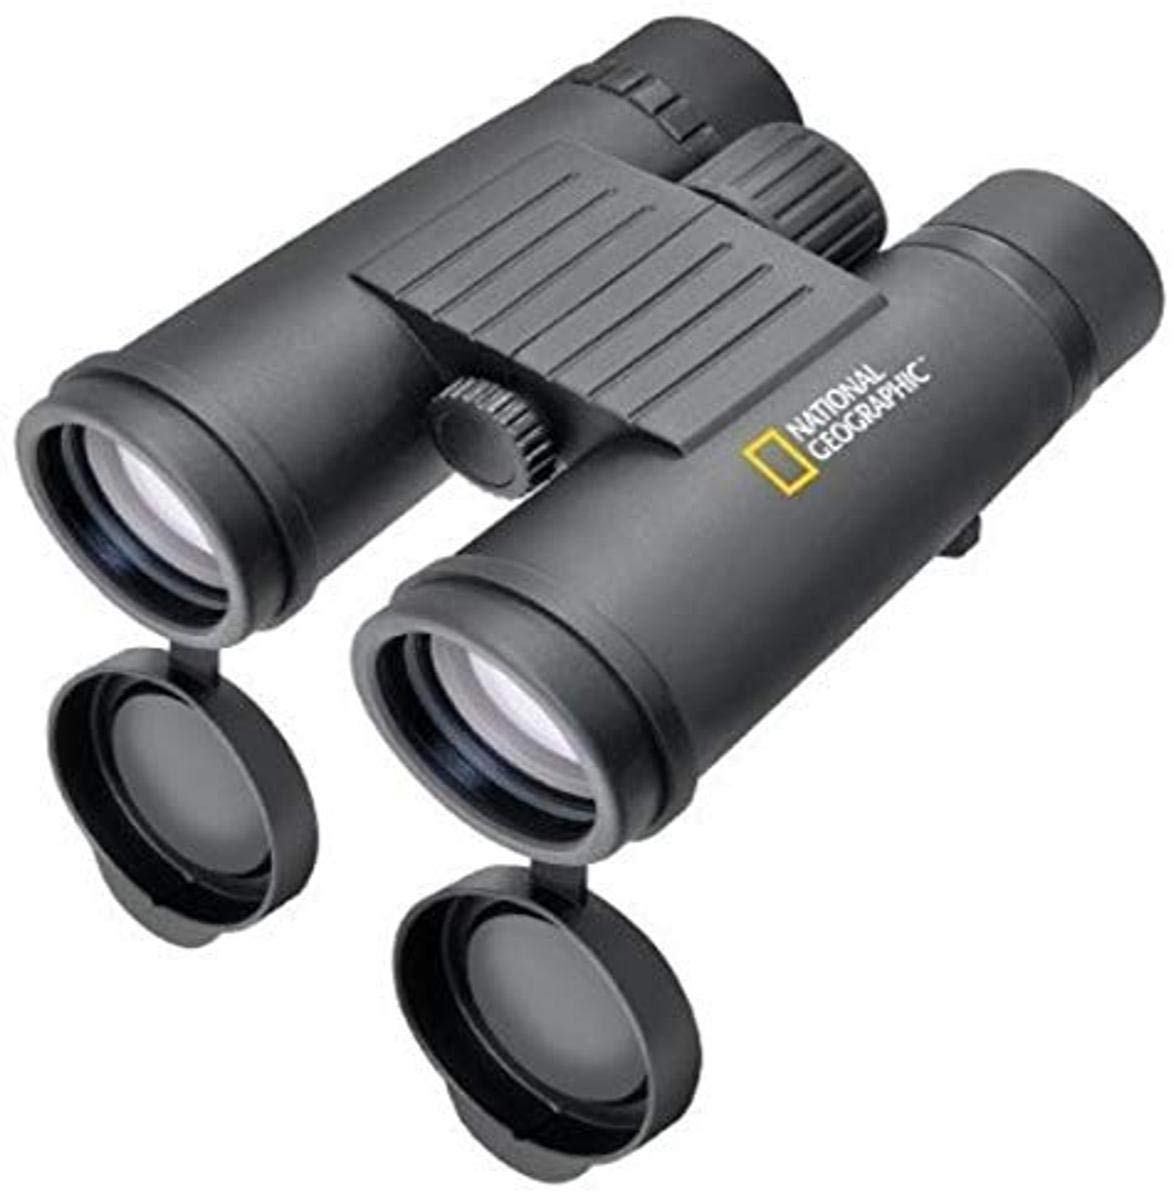 National Geographic 8x42mm Binoculars $17.95 + Free Shipping w/ Prime or on $35+